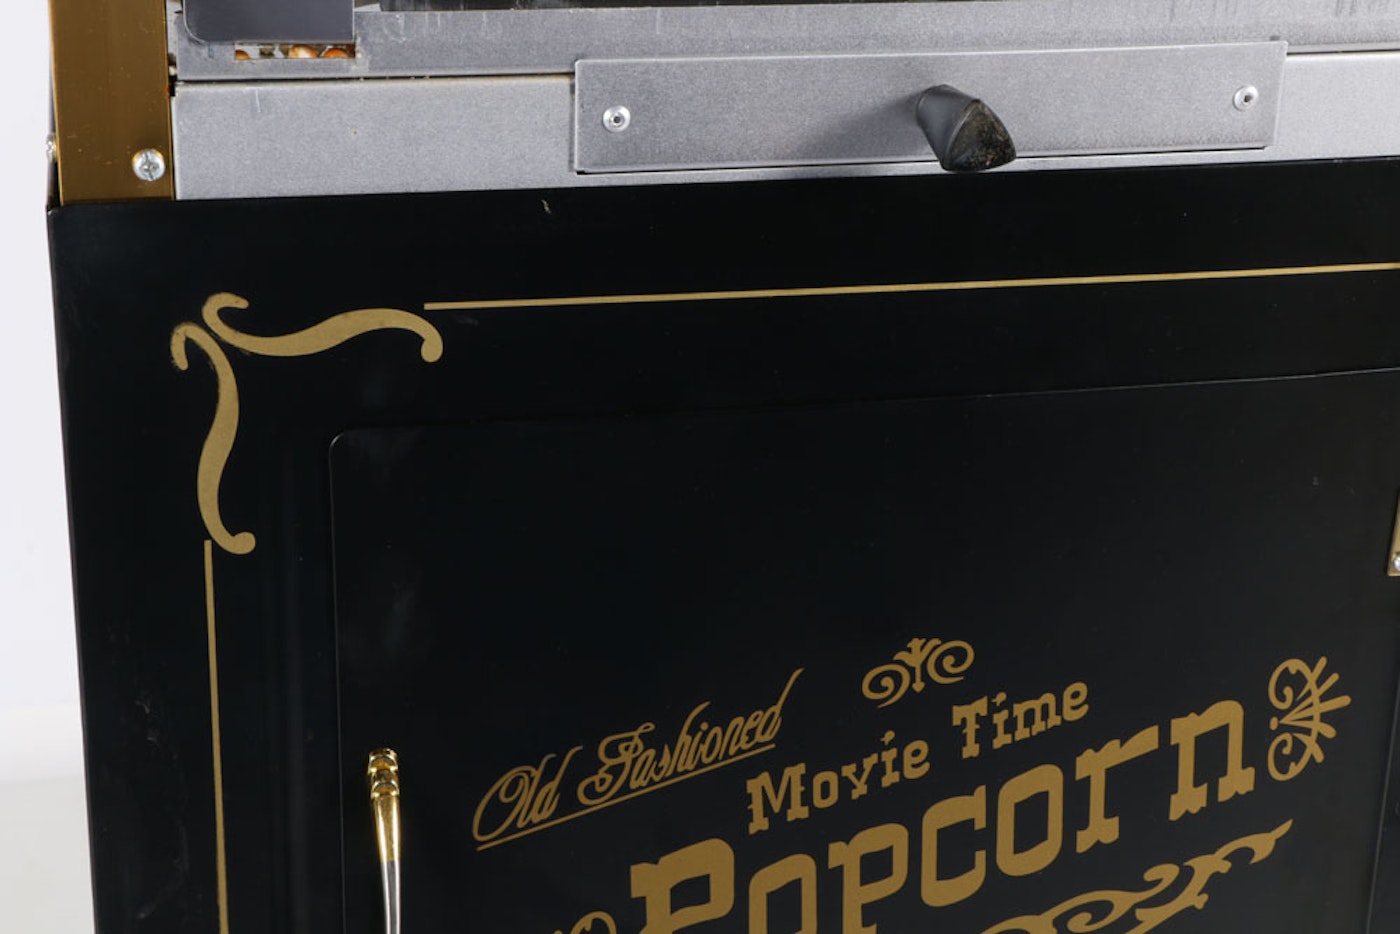 25 Top Images Old Fashioned Movie Time Popcorn : Shop Nostalgia Vintage Collection Old Fashioned Movie Time ...